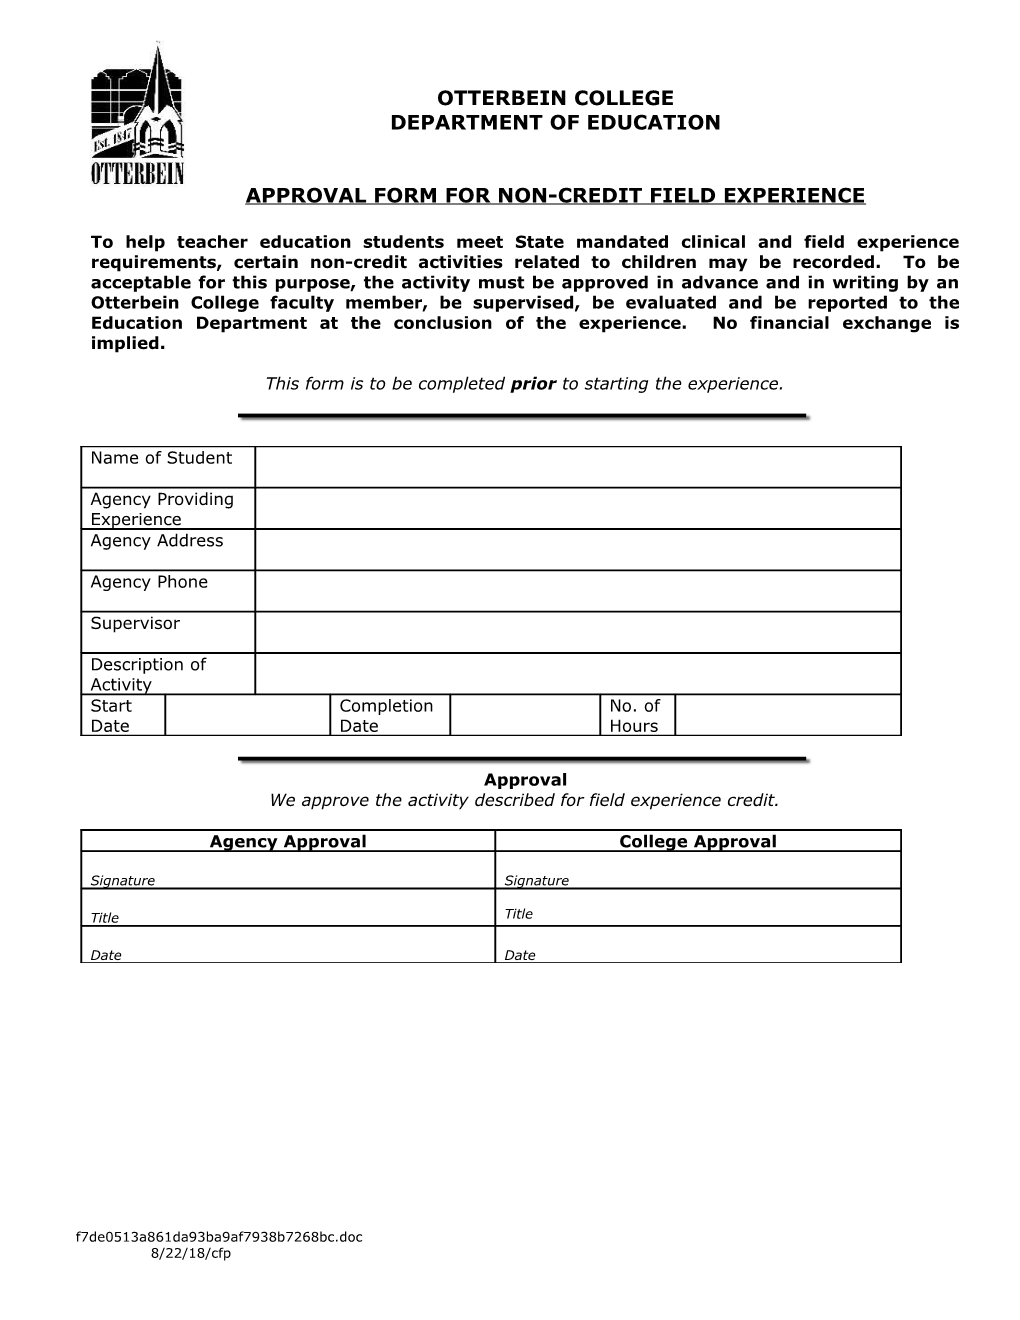 Approval Form for Non-Credit Field Experience